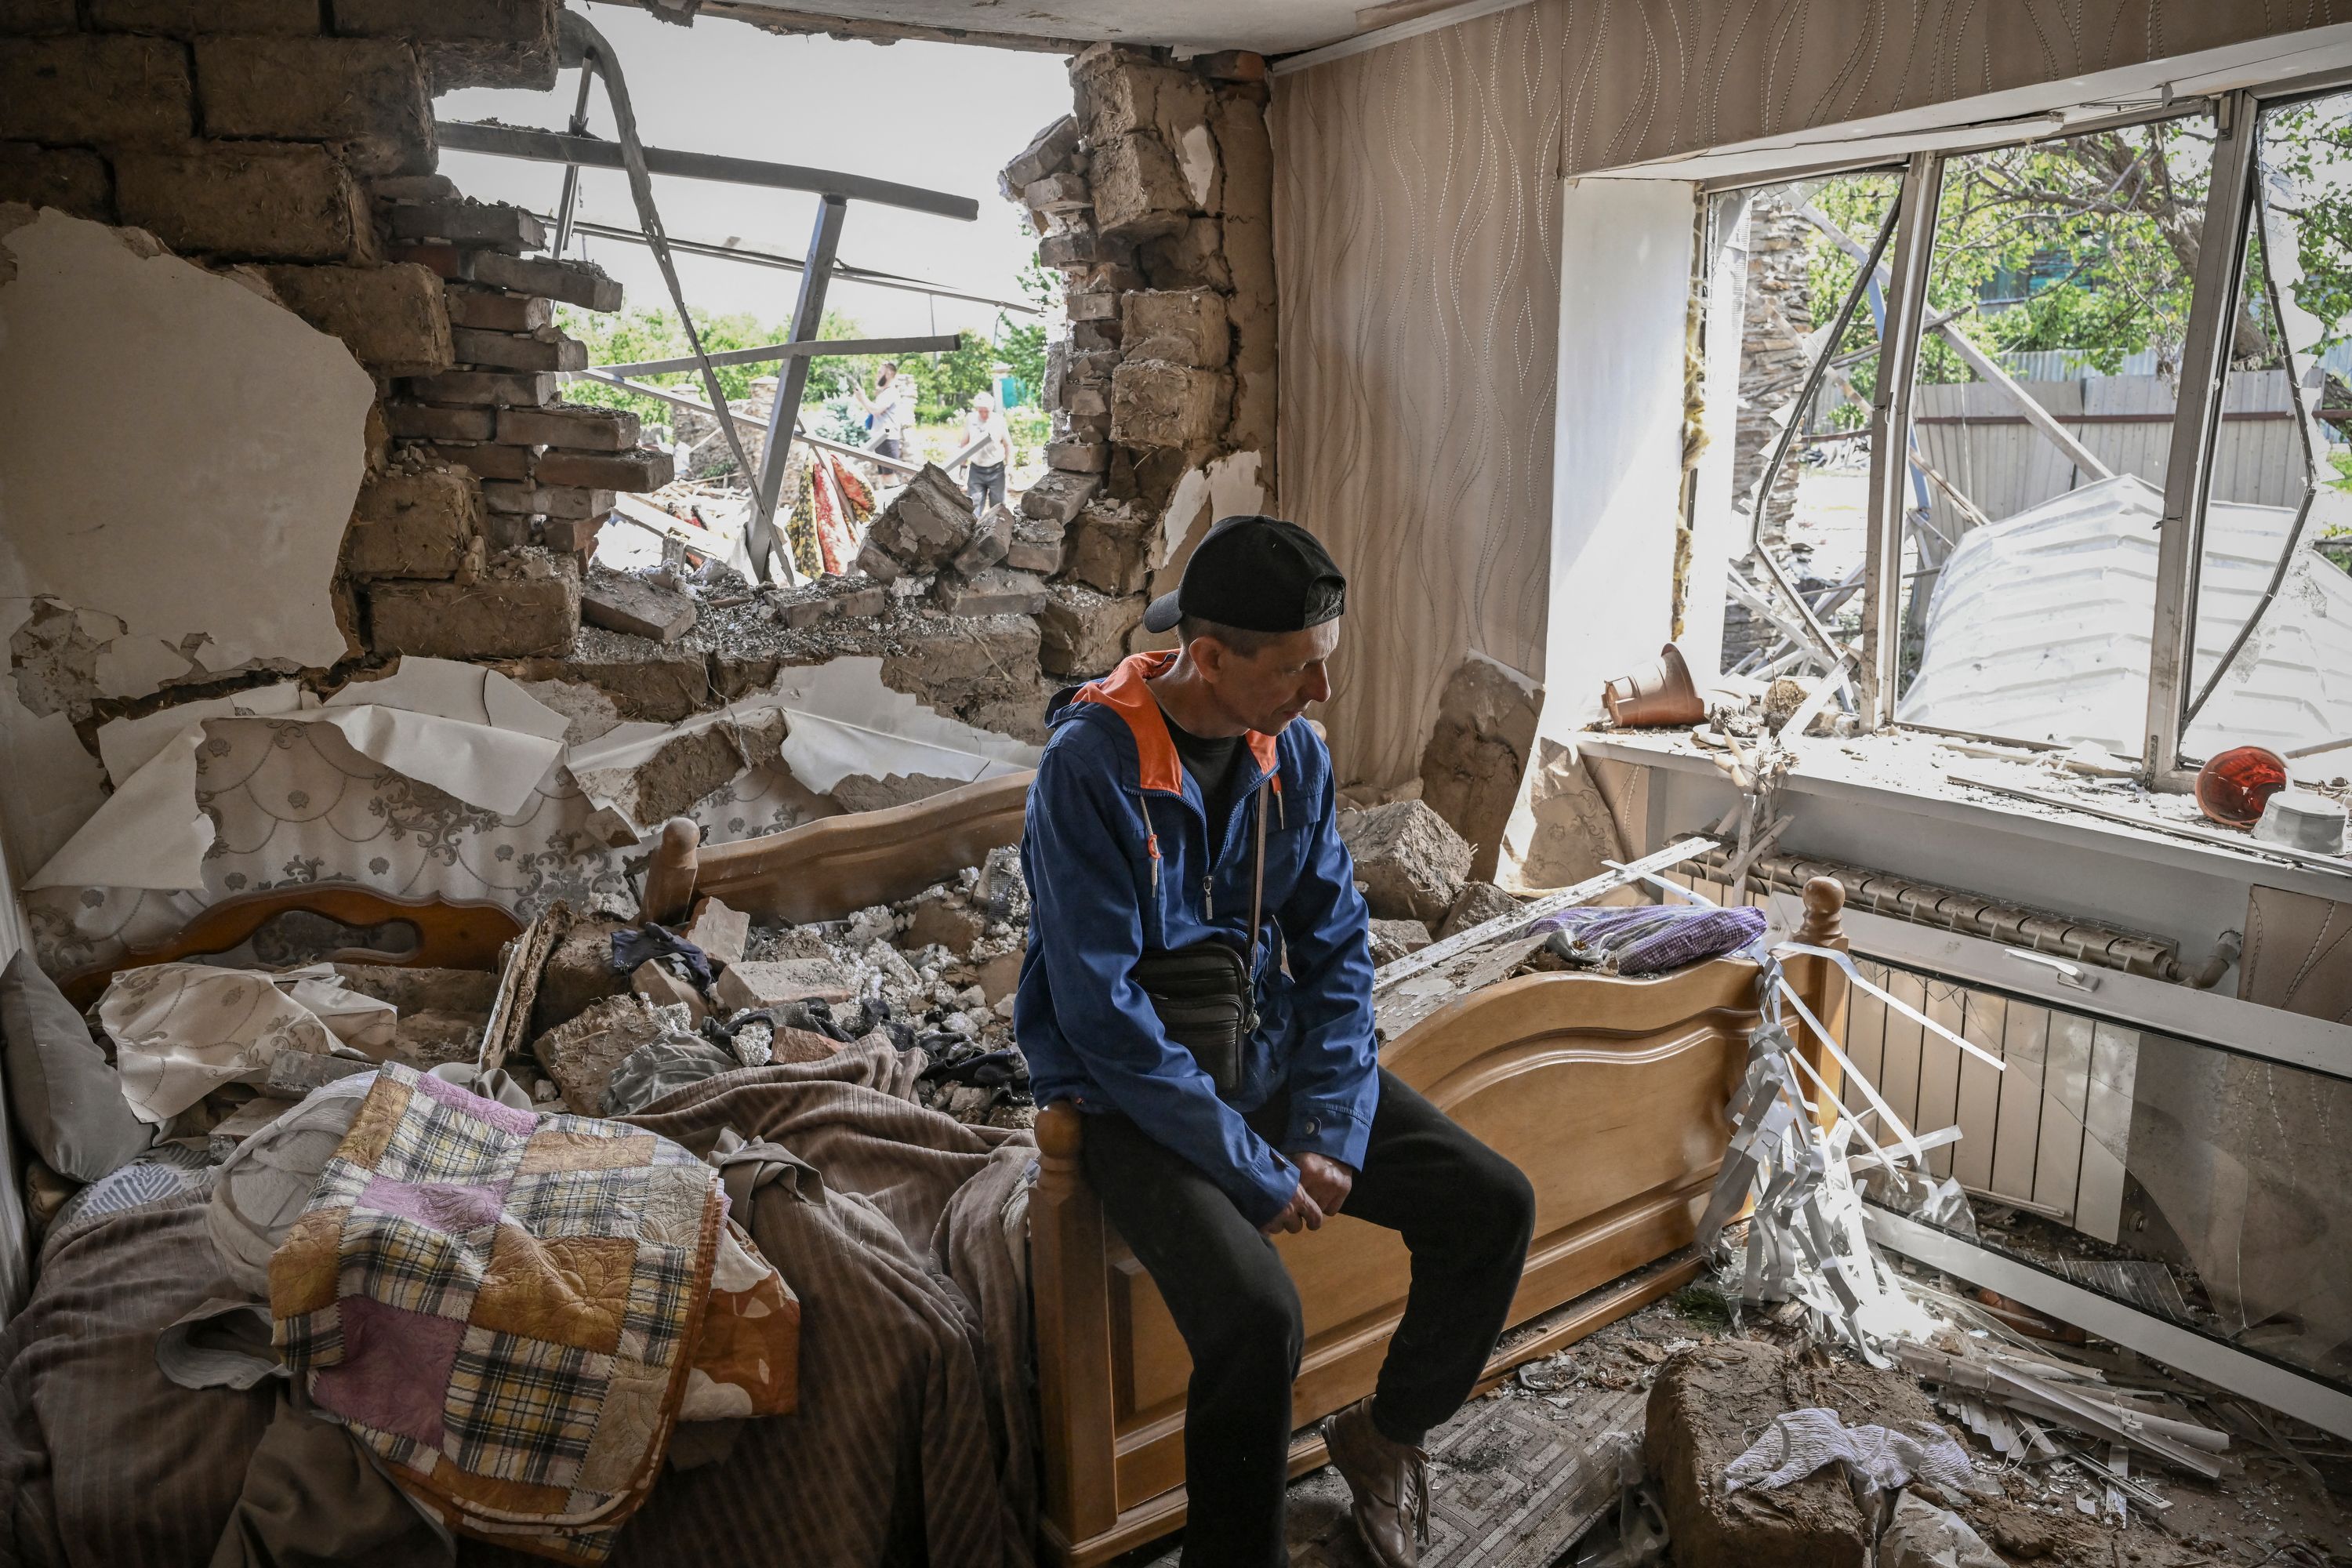 Sergiy Tarasyuk, 49, sits on his bed after a missile strike in the city of Sloviansk, the eastern Ukrainian region of Donbas, on Wednesday. Tarasyuk survived since he felt asleep in the living room the night before.